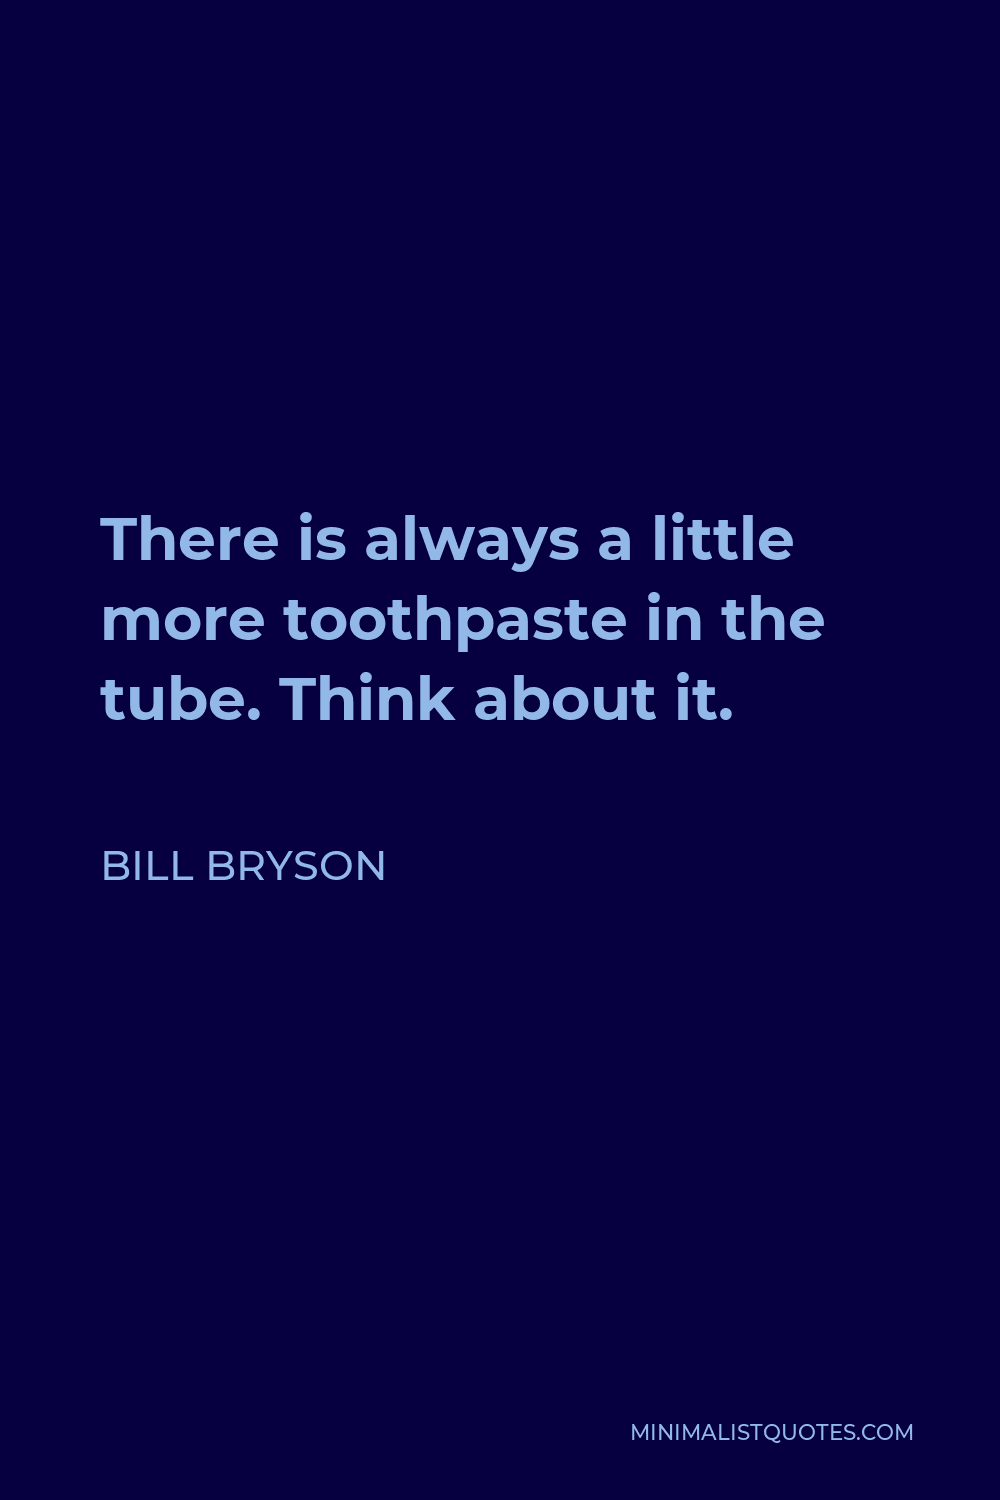 Bill Bryson Quote - There is always a little more toothpaste in the tube. Think about it.